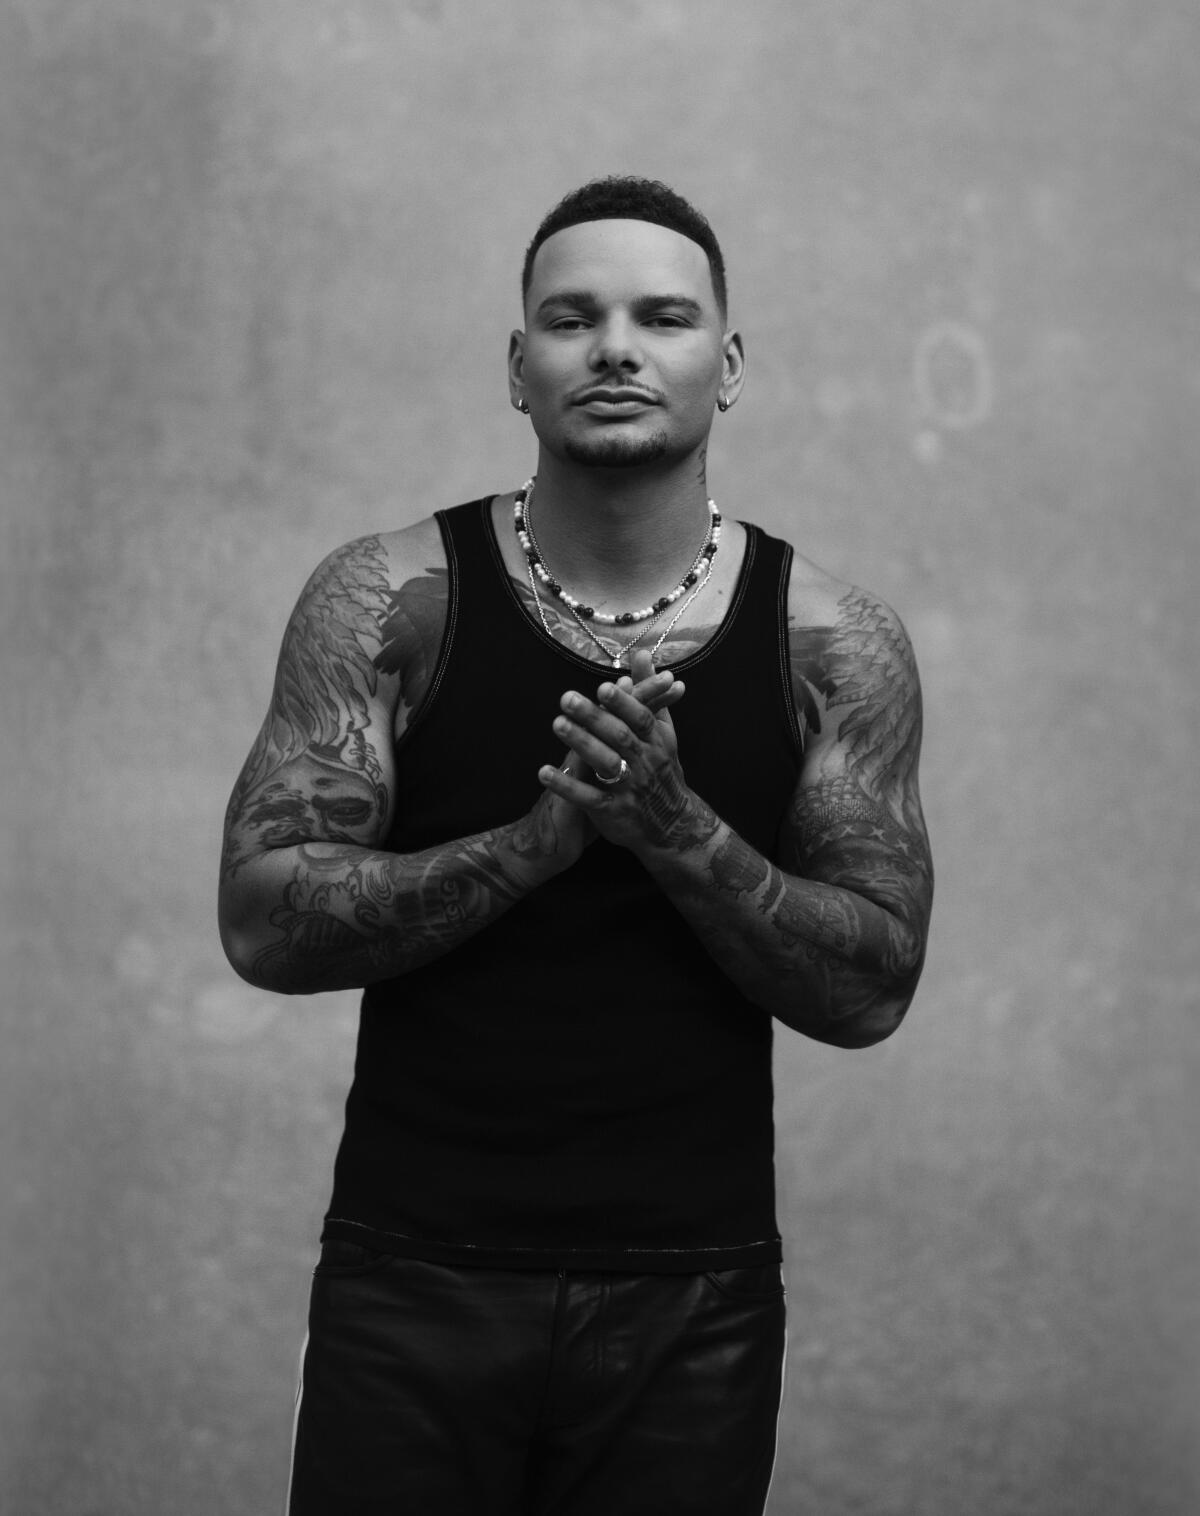 A man in a black t-shirt with many tattoos stands for a portrait